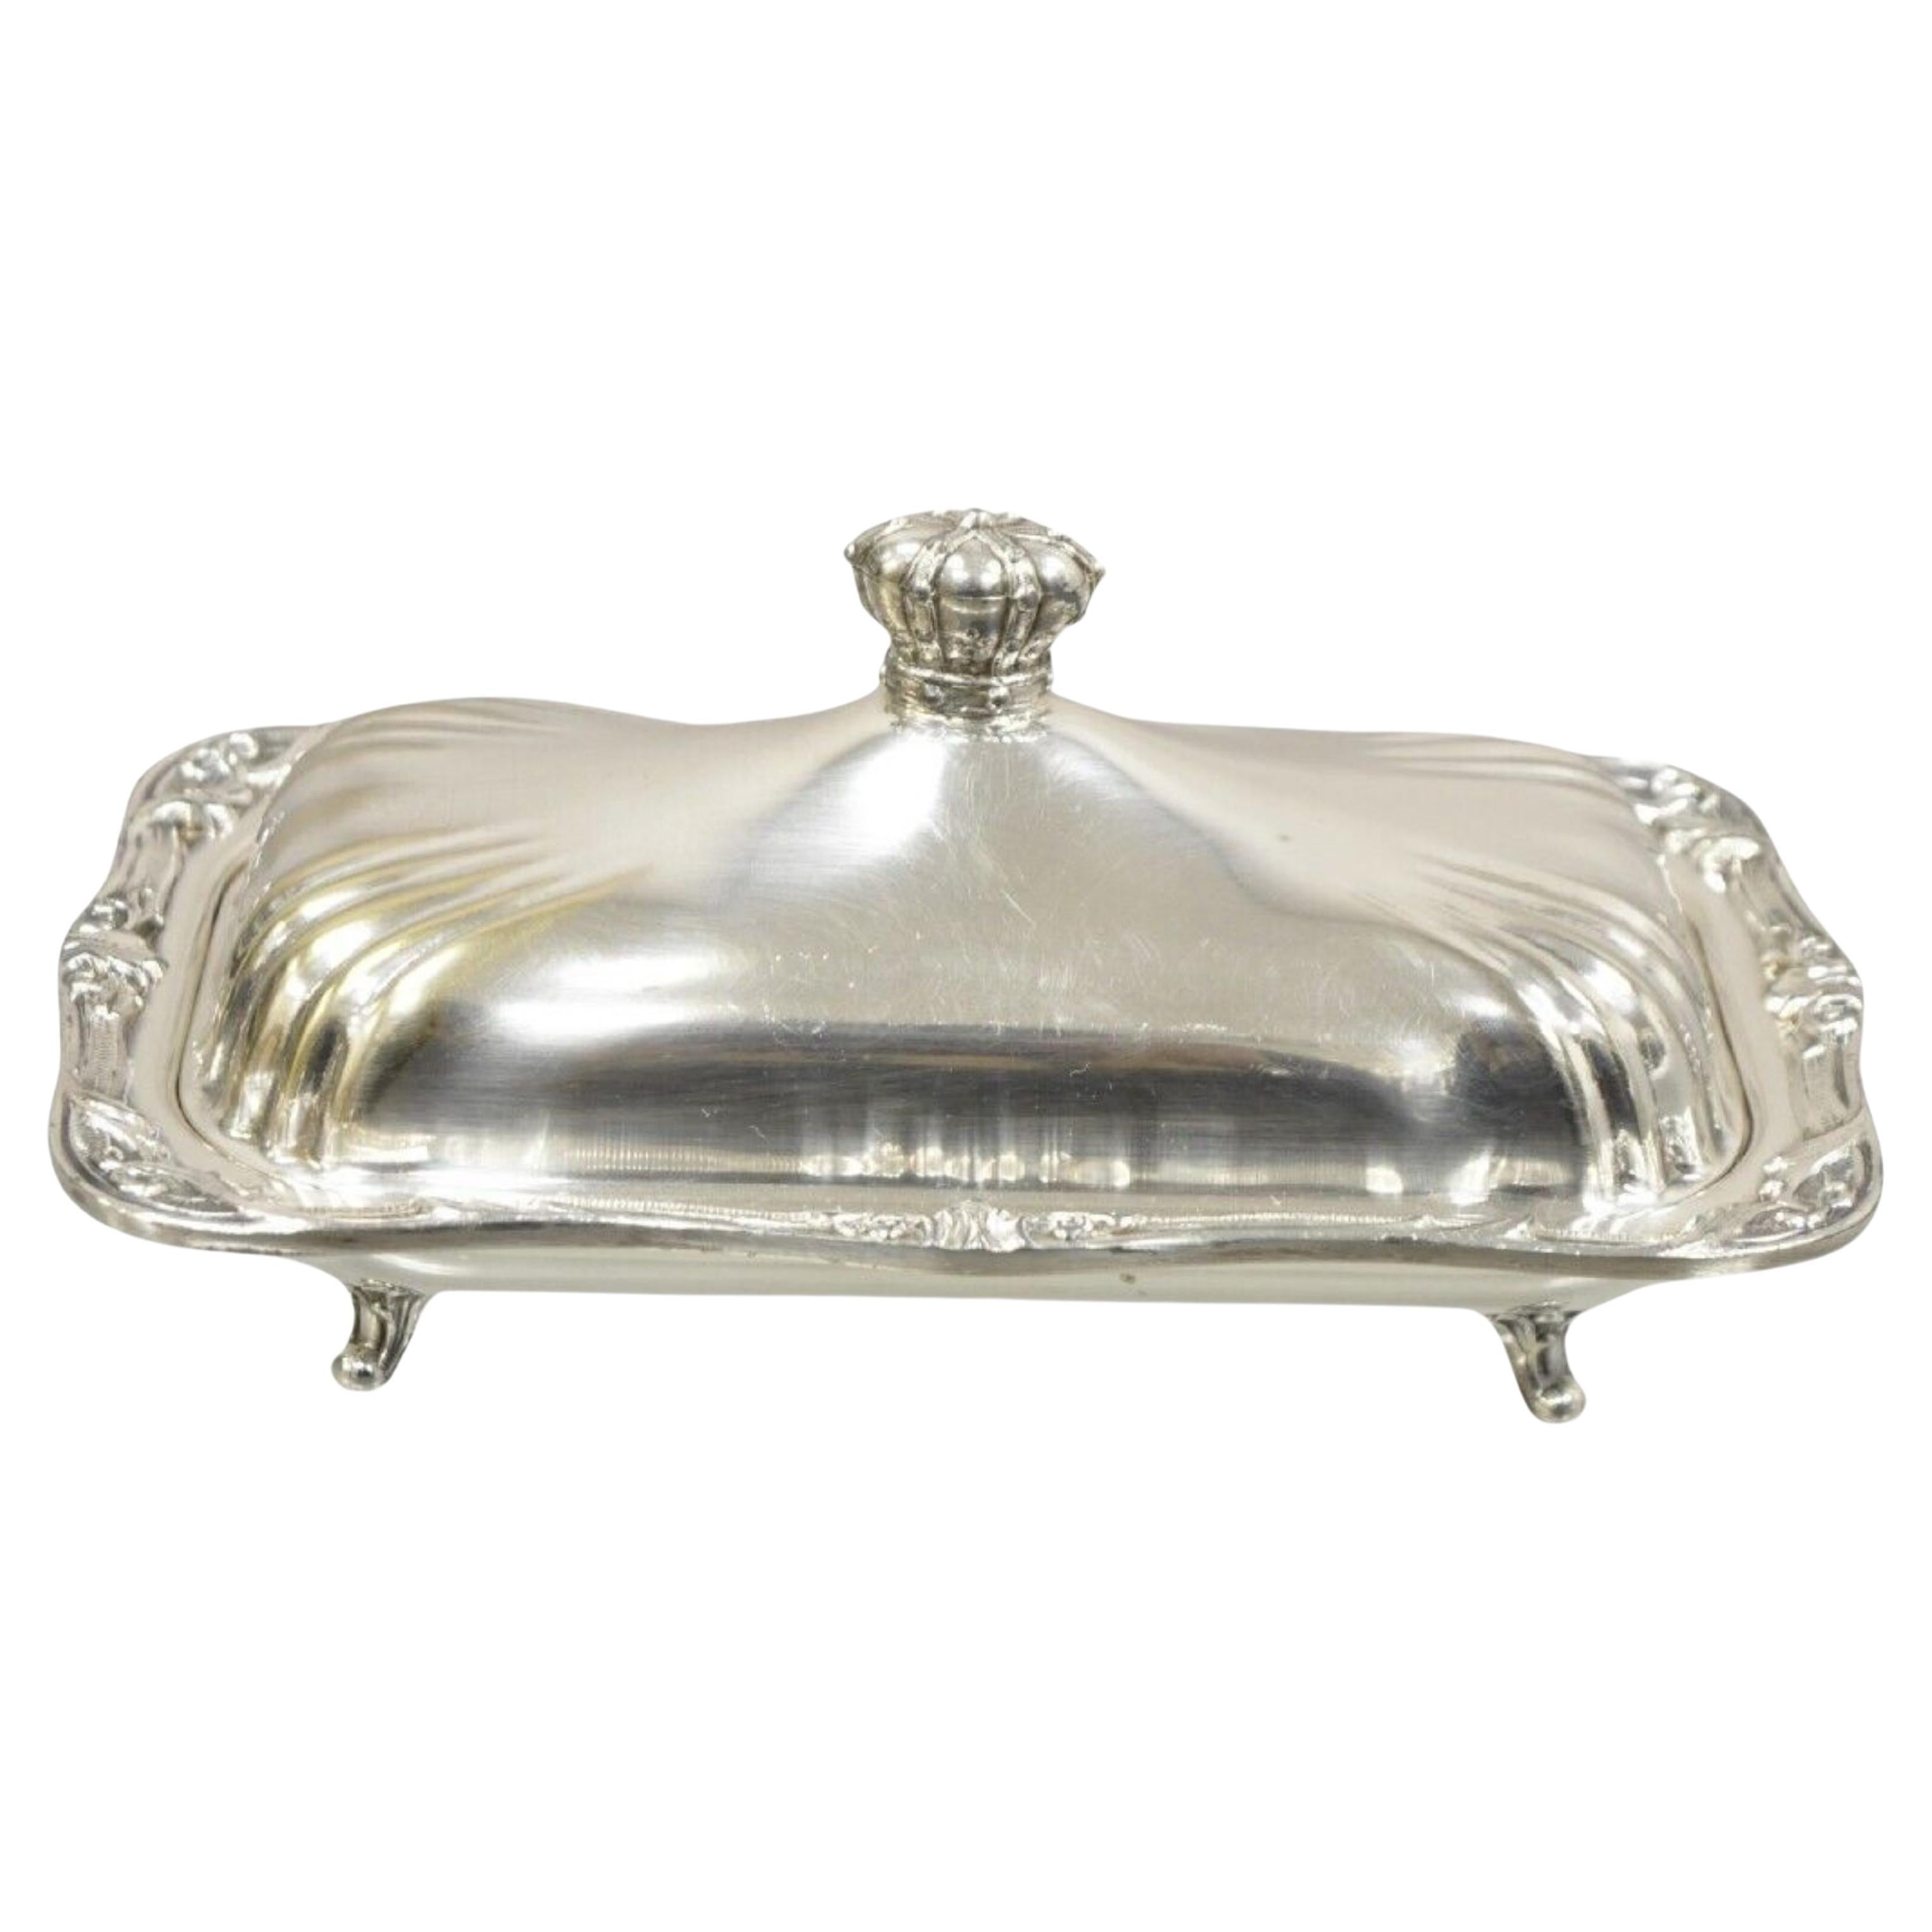 Vintage Coronet Silver Victorian Silver Plated Covered Butter Dish Crown Handle For Sale